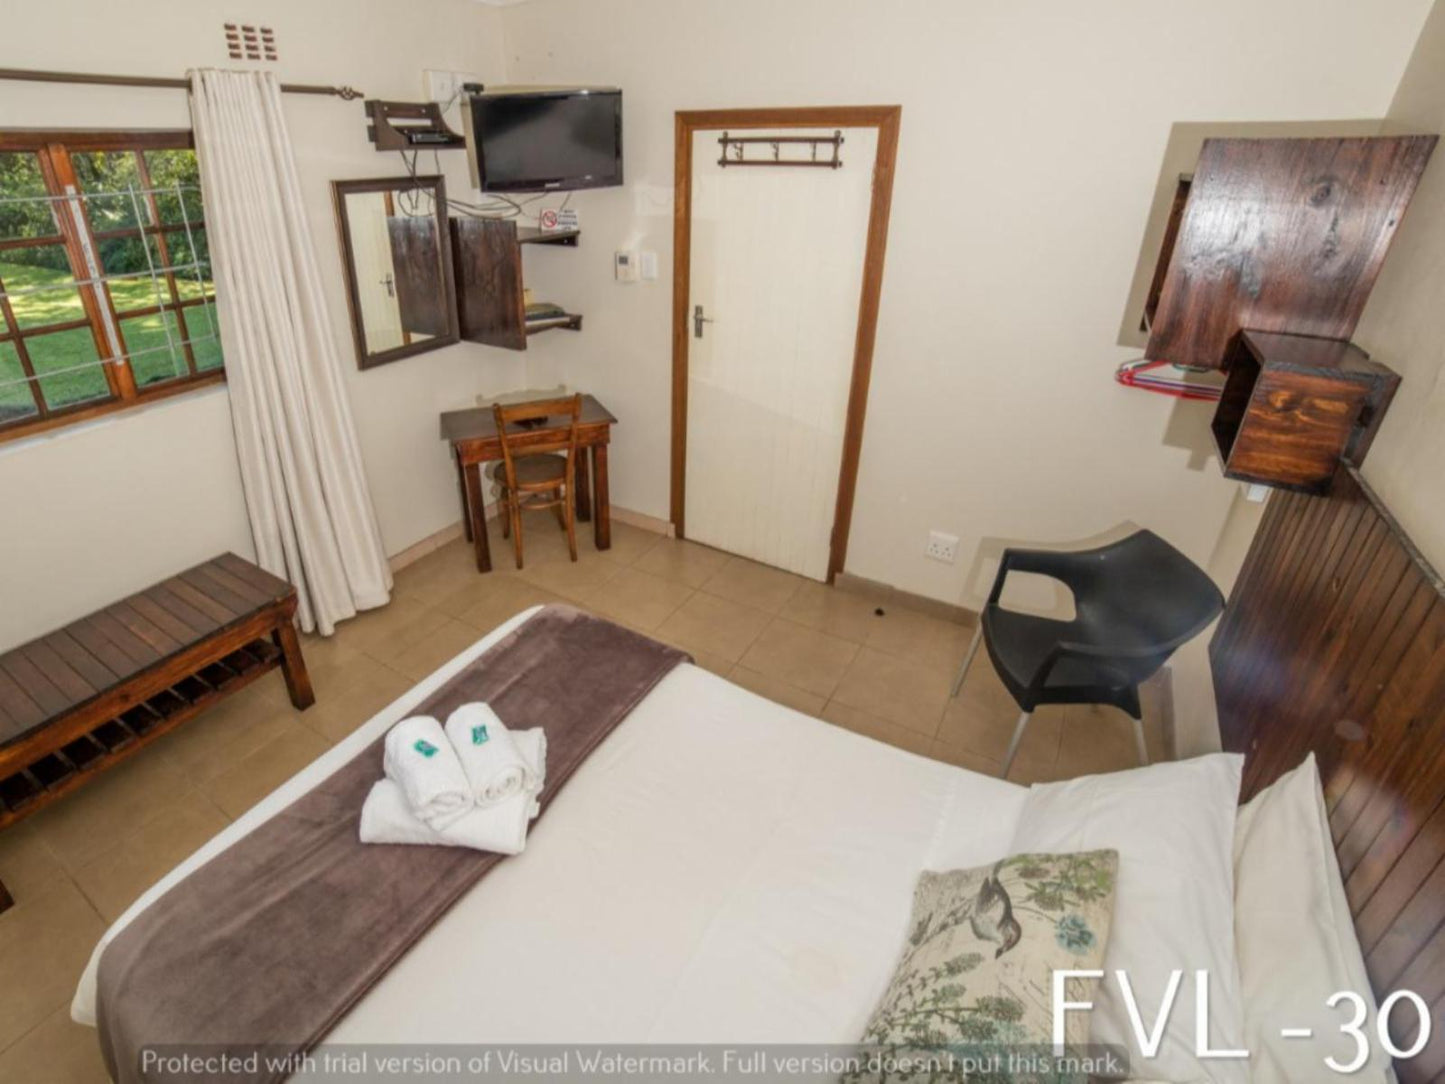 Double Room @ Forest View Lodge